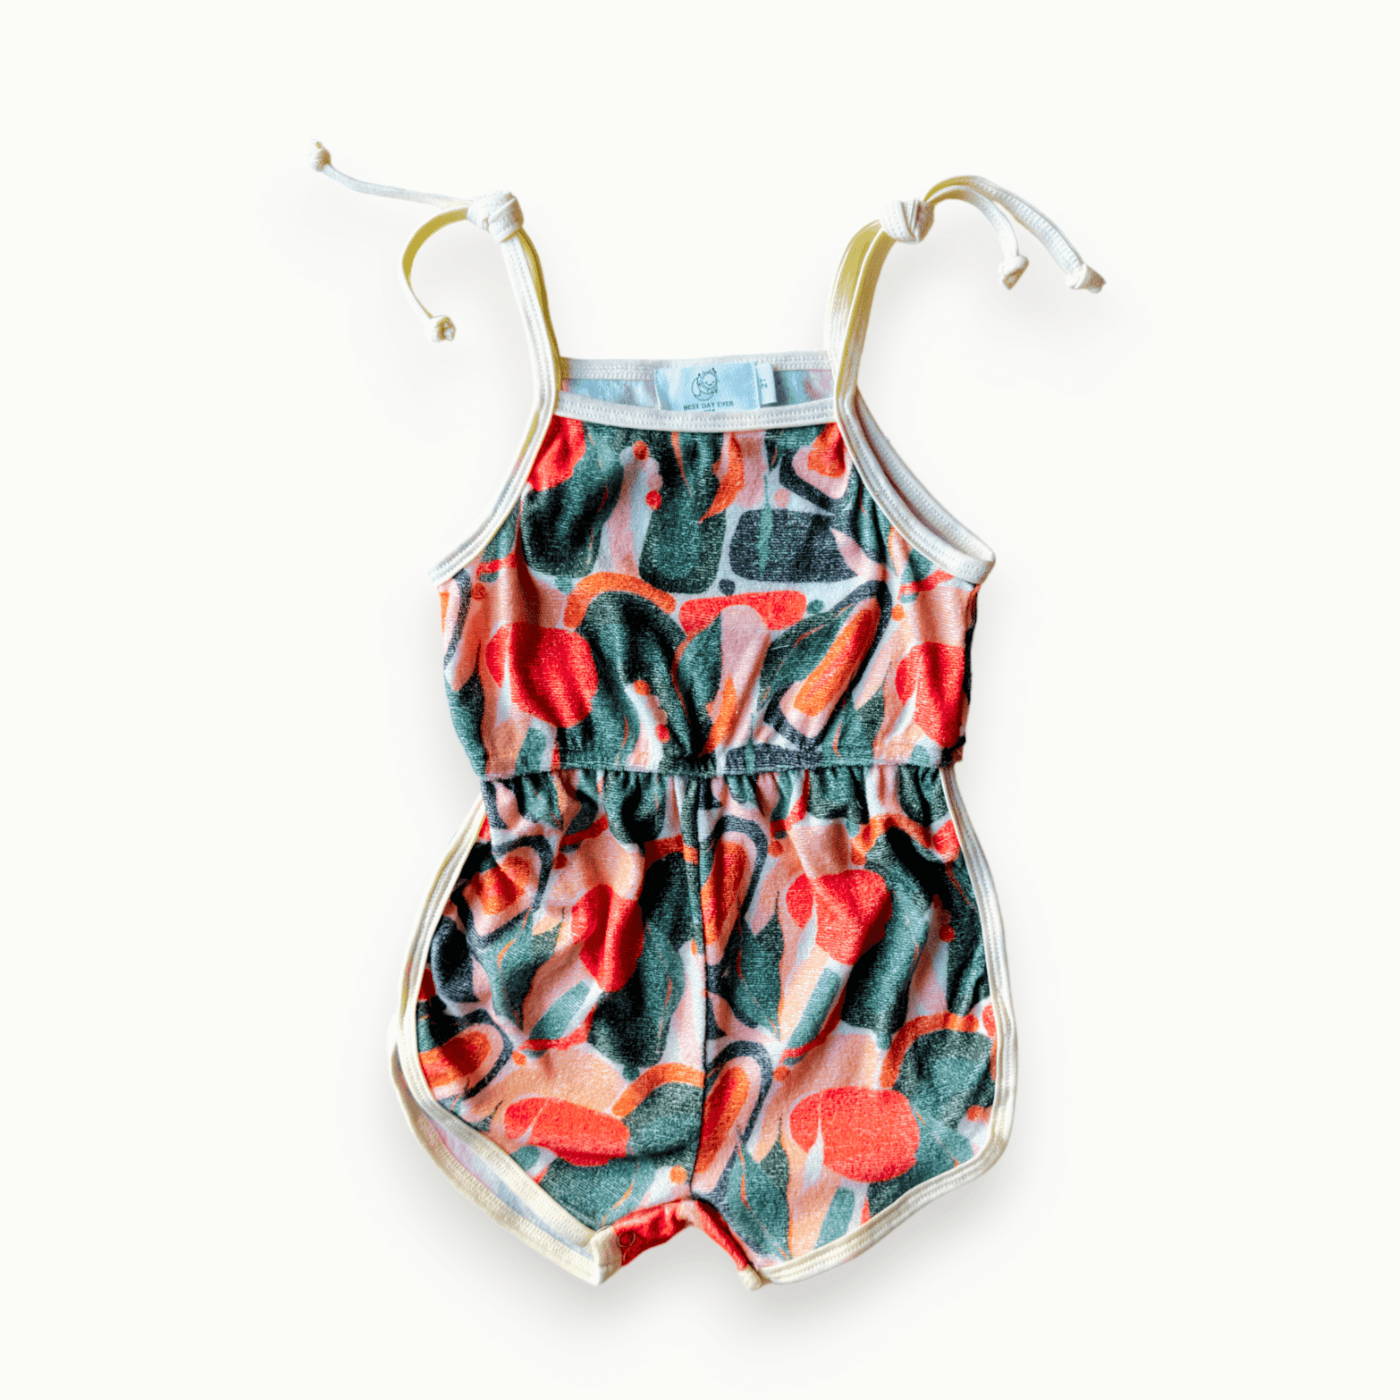 Best Day Ever Kids Baby One-Pieces Terry-rific Romper - Mad Men buy online boutique kids clothing